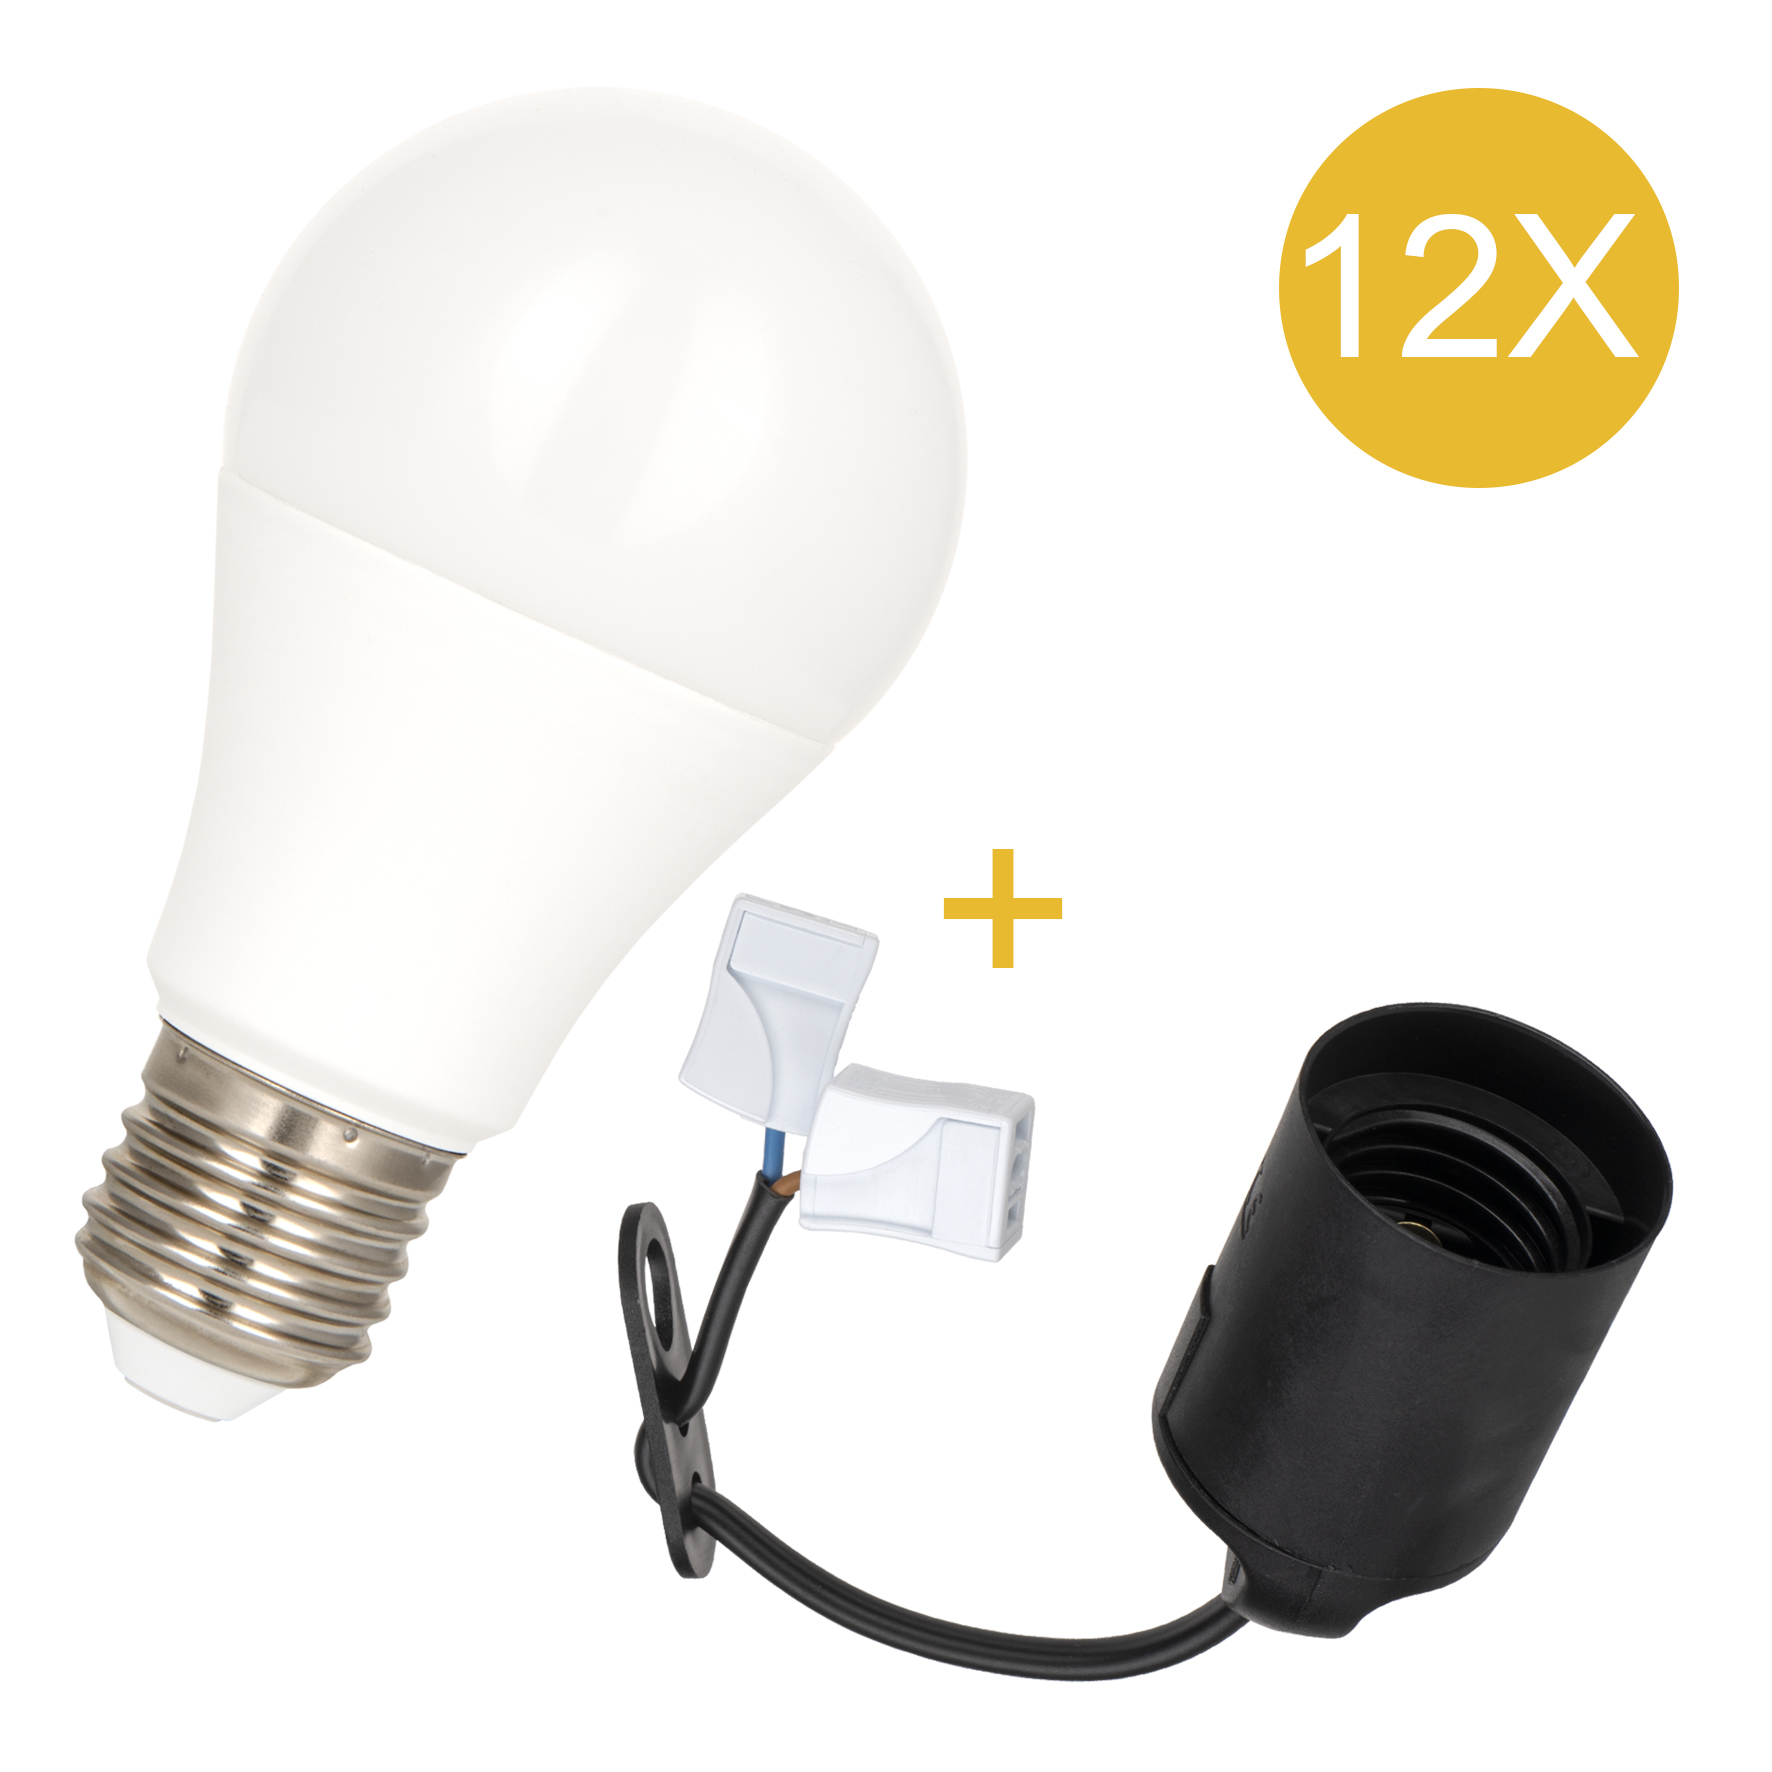 12-Pack Combi E27 LH Connector + LED 6W 2700K